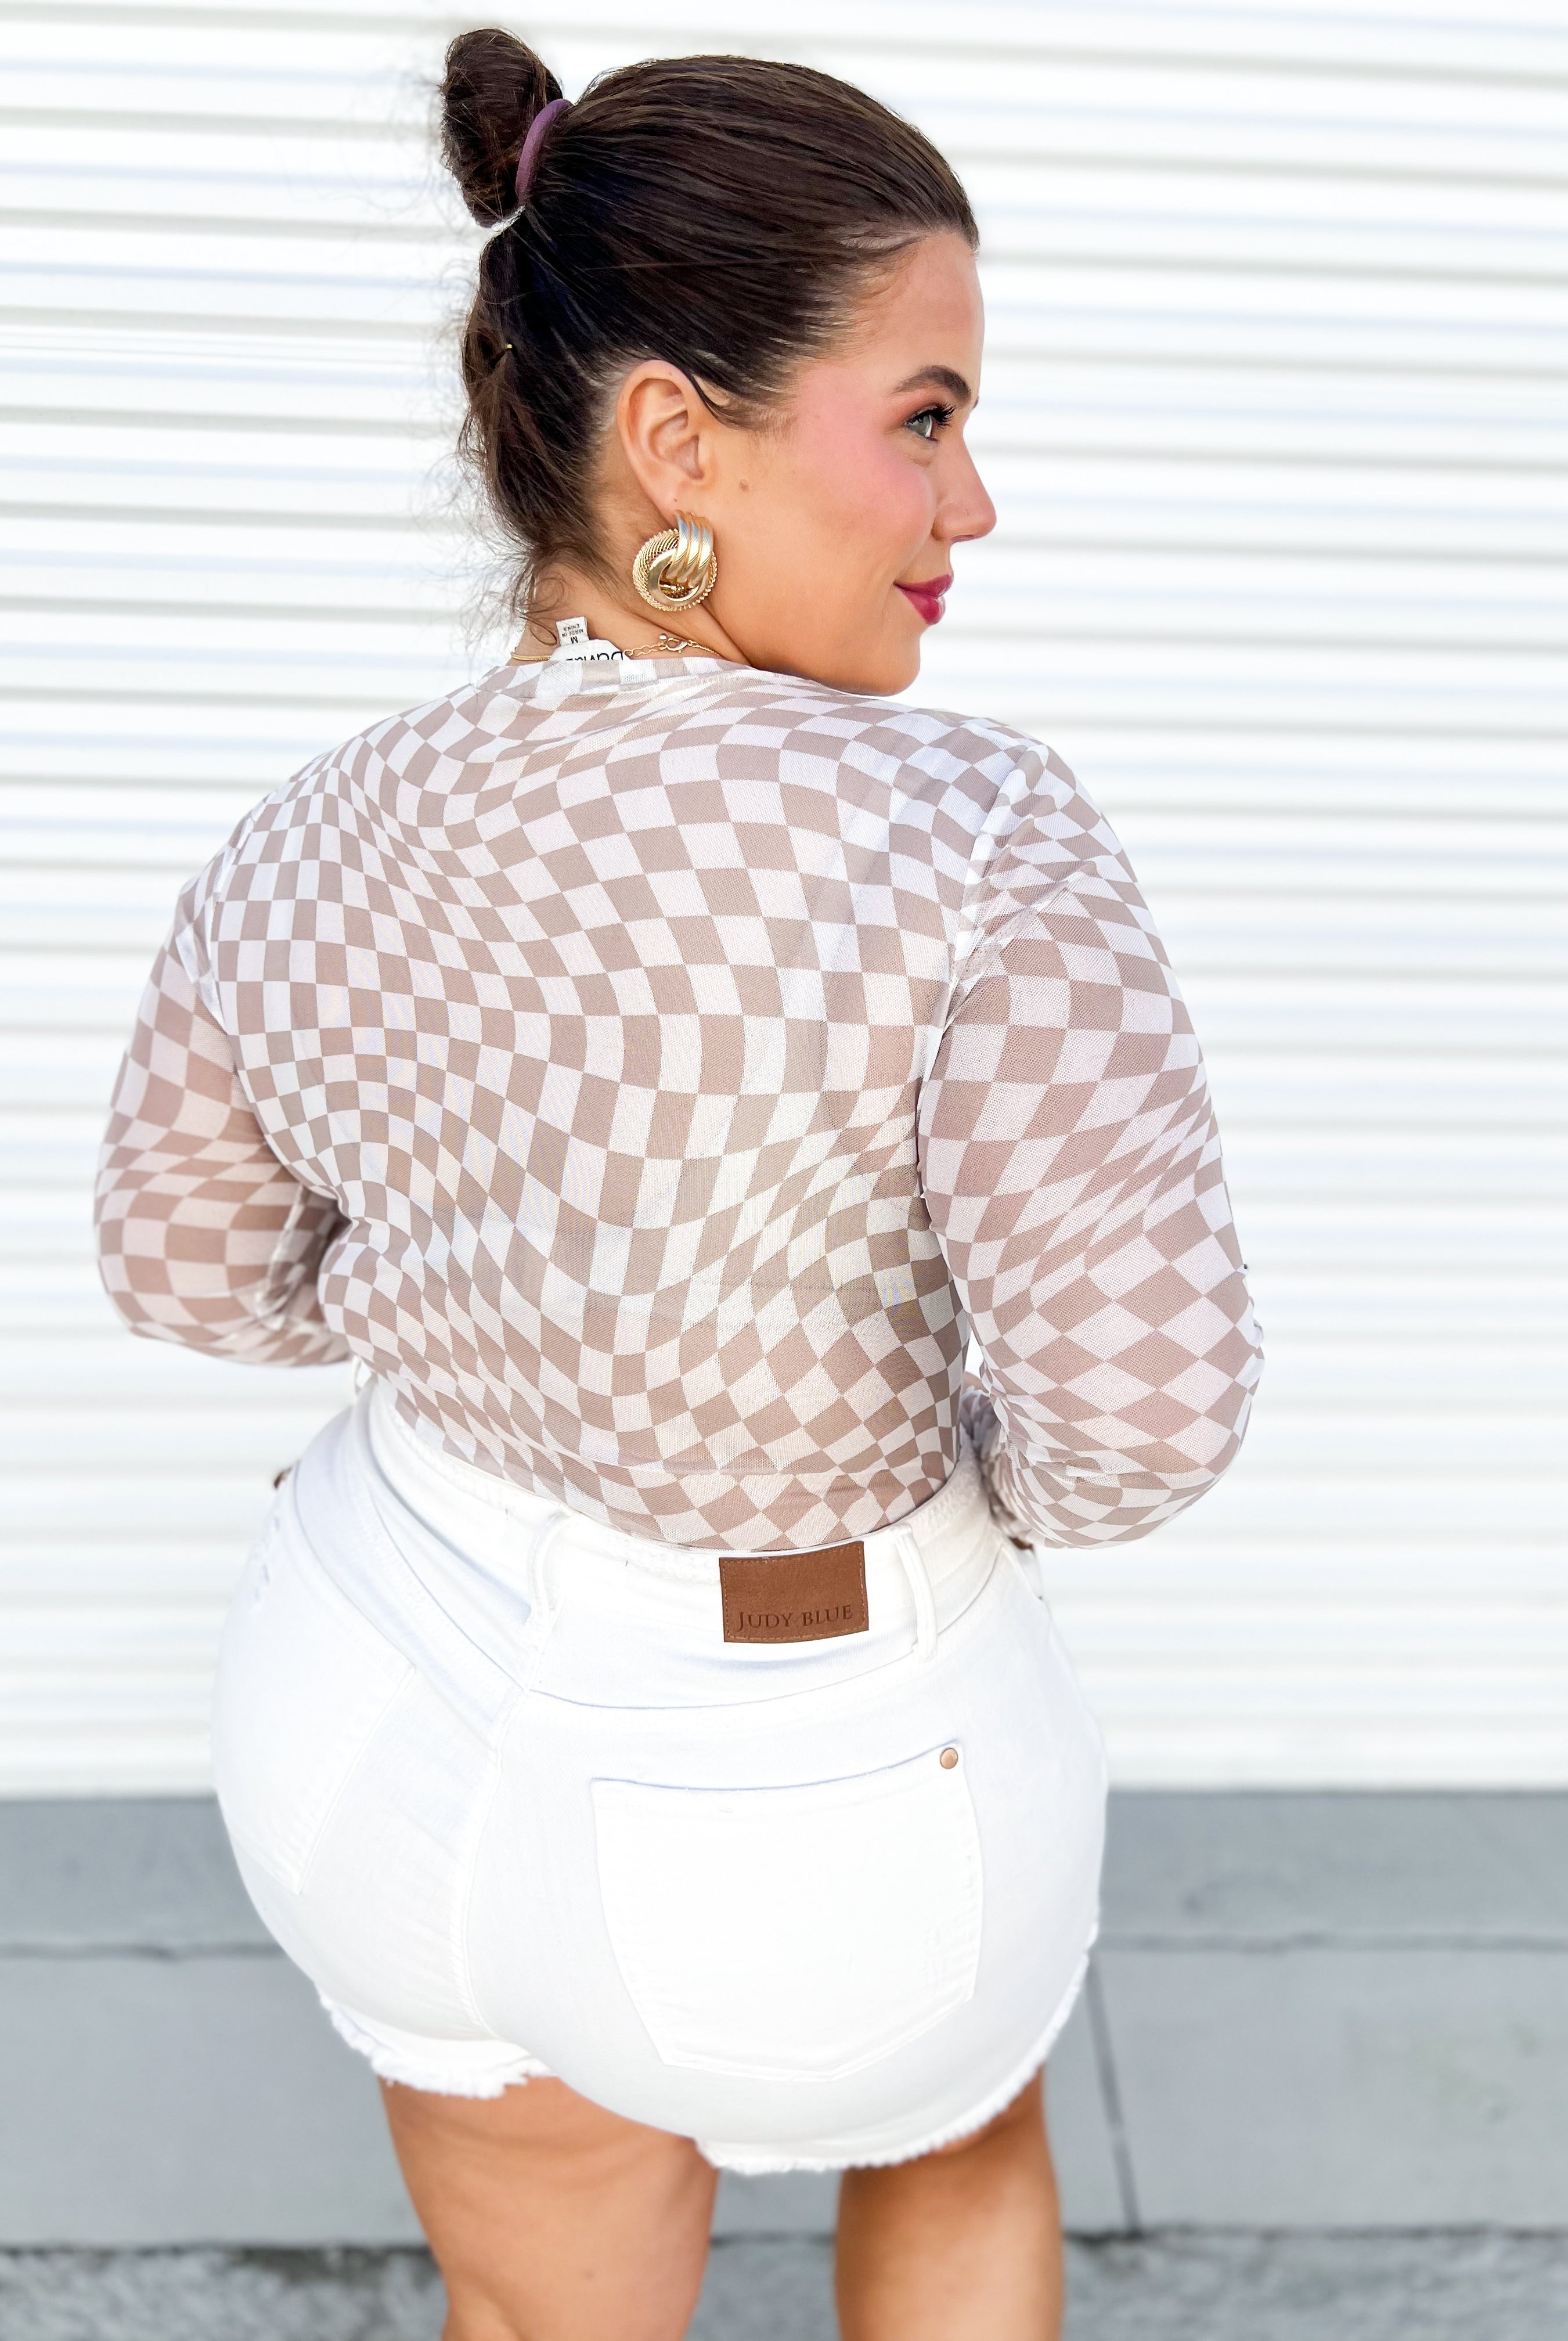 RESTOCK: Checkmate Long Sleeve Top-120 Long Sleeve Tops-Davi & Dani-Heathered Boho Boutique, Women's Fashion and Accessories in Palmetto, FL